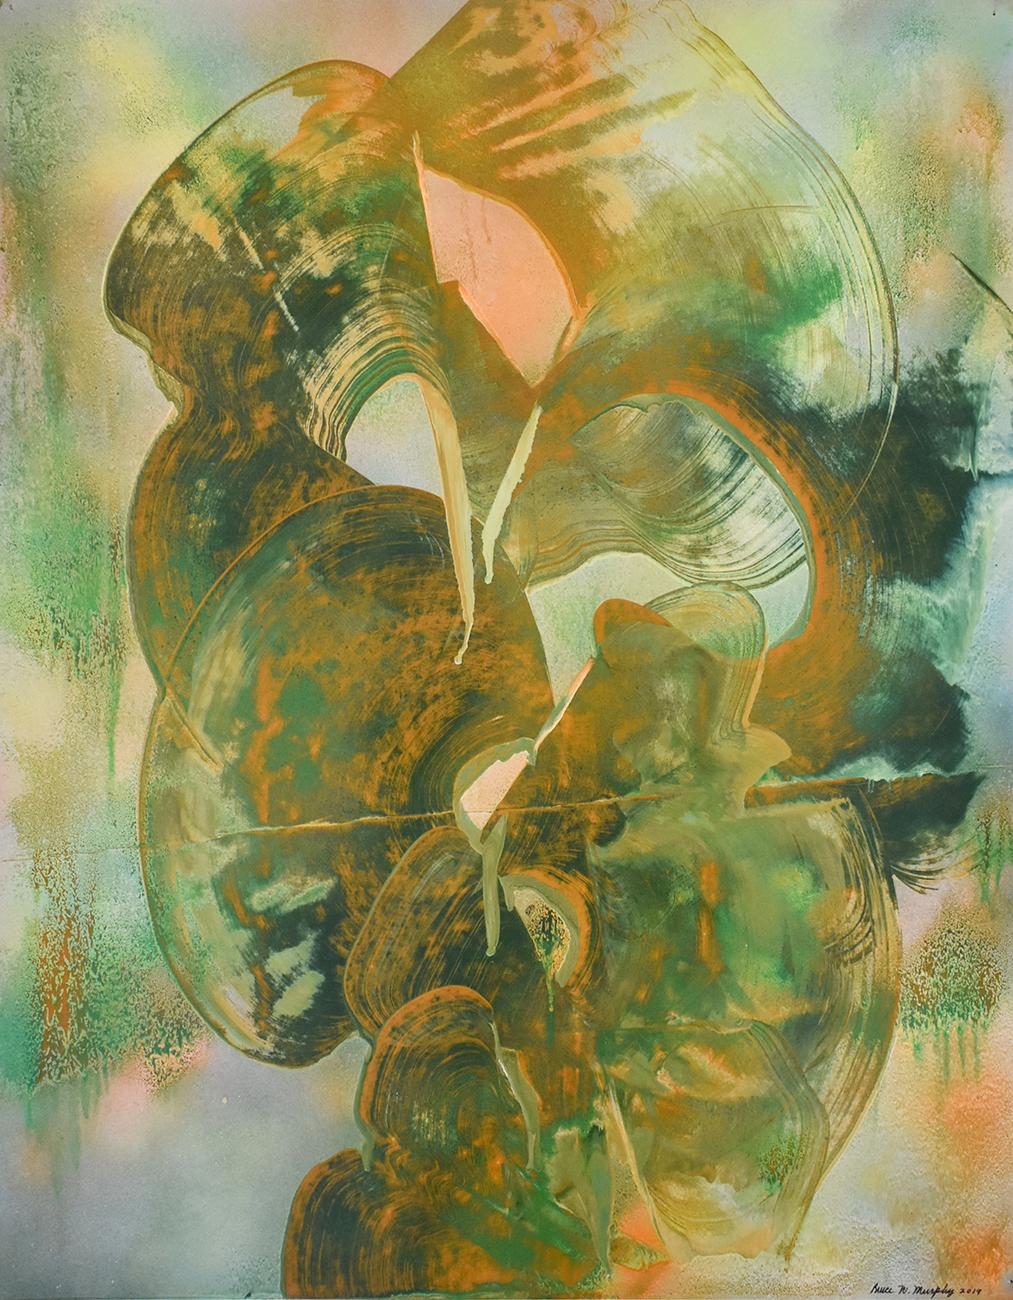 Lady with a Frog (Gestural Abstract Painting on Paper in Green & Ochre)